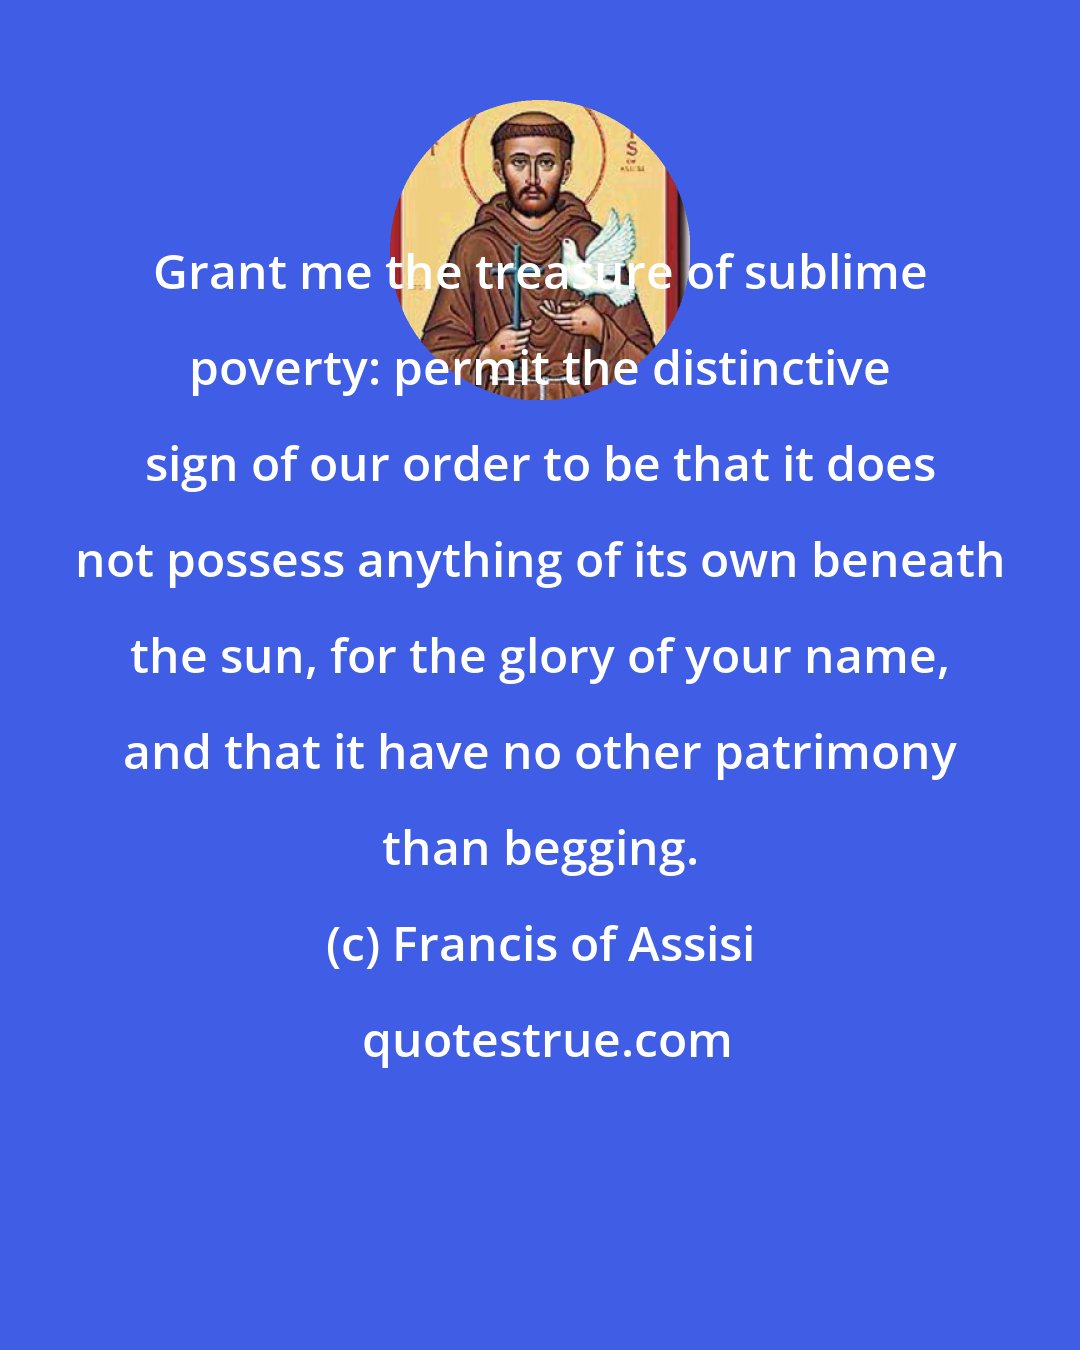 Francis of Assisi: Grant me the treasure of sublime poverty: permit the distinctive sign of our order to be that it does not possess anything of its own beneath the sun, for the glory of your name, and that it have no other patrimony than begging.